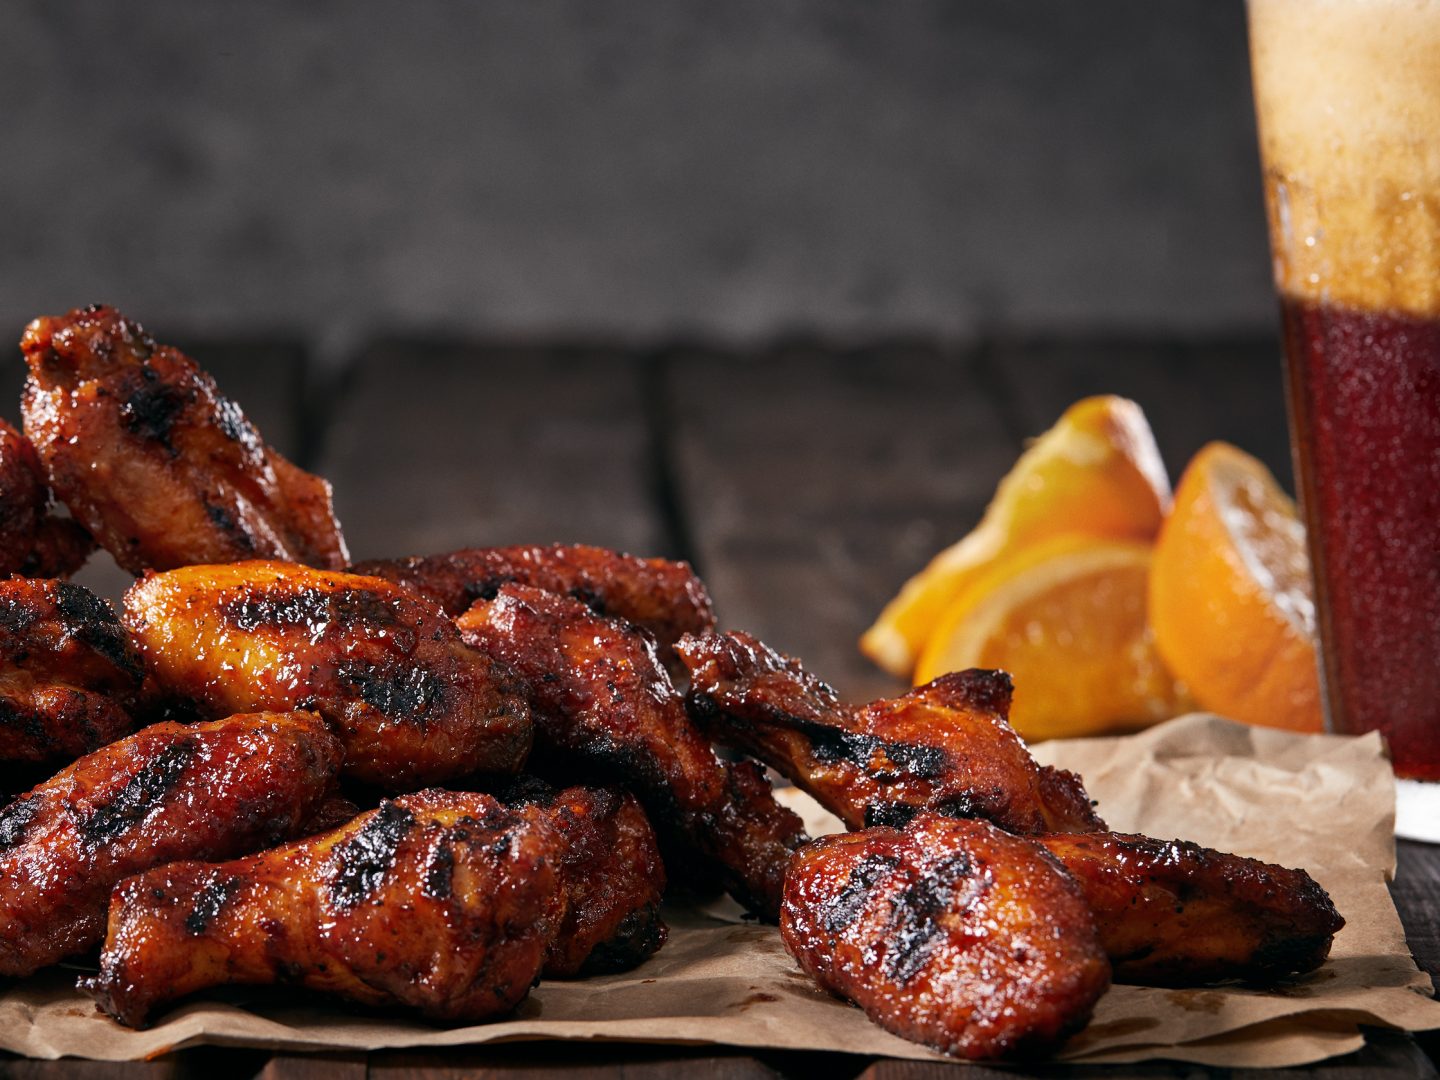 https://www.grilled.com/wp-content/uploads/2016/09/Grilled_RootBeerWings_10904-1440x1080.jpg